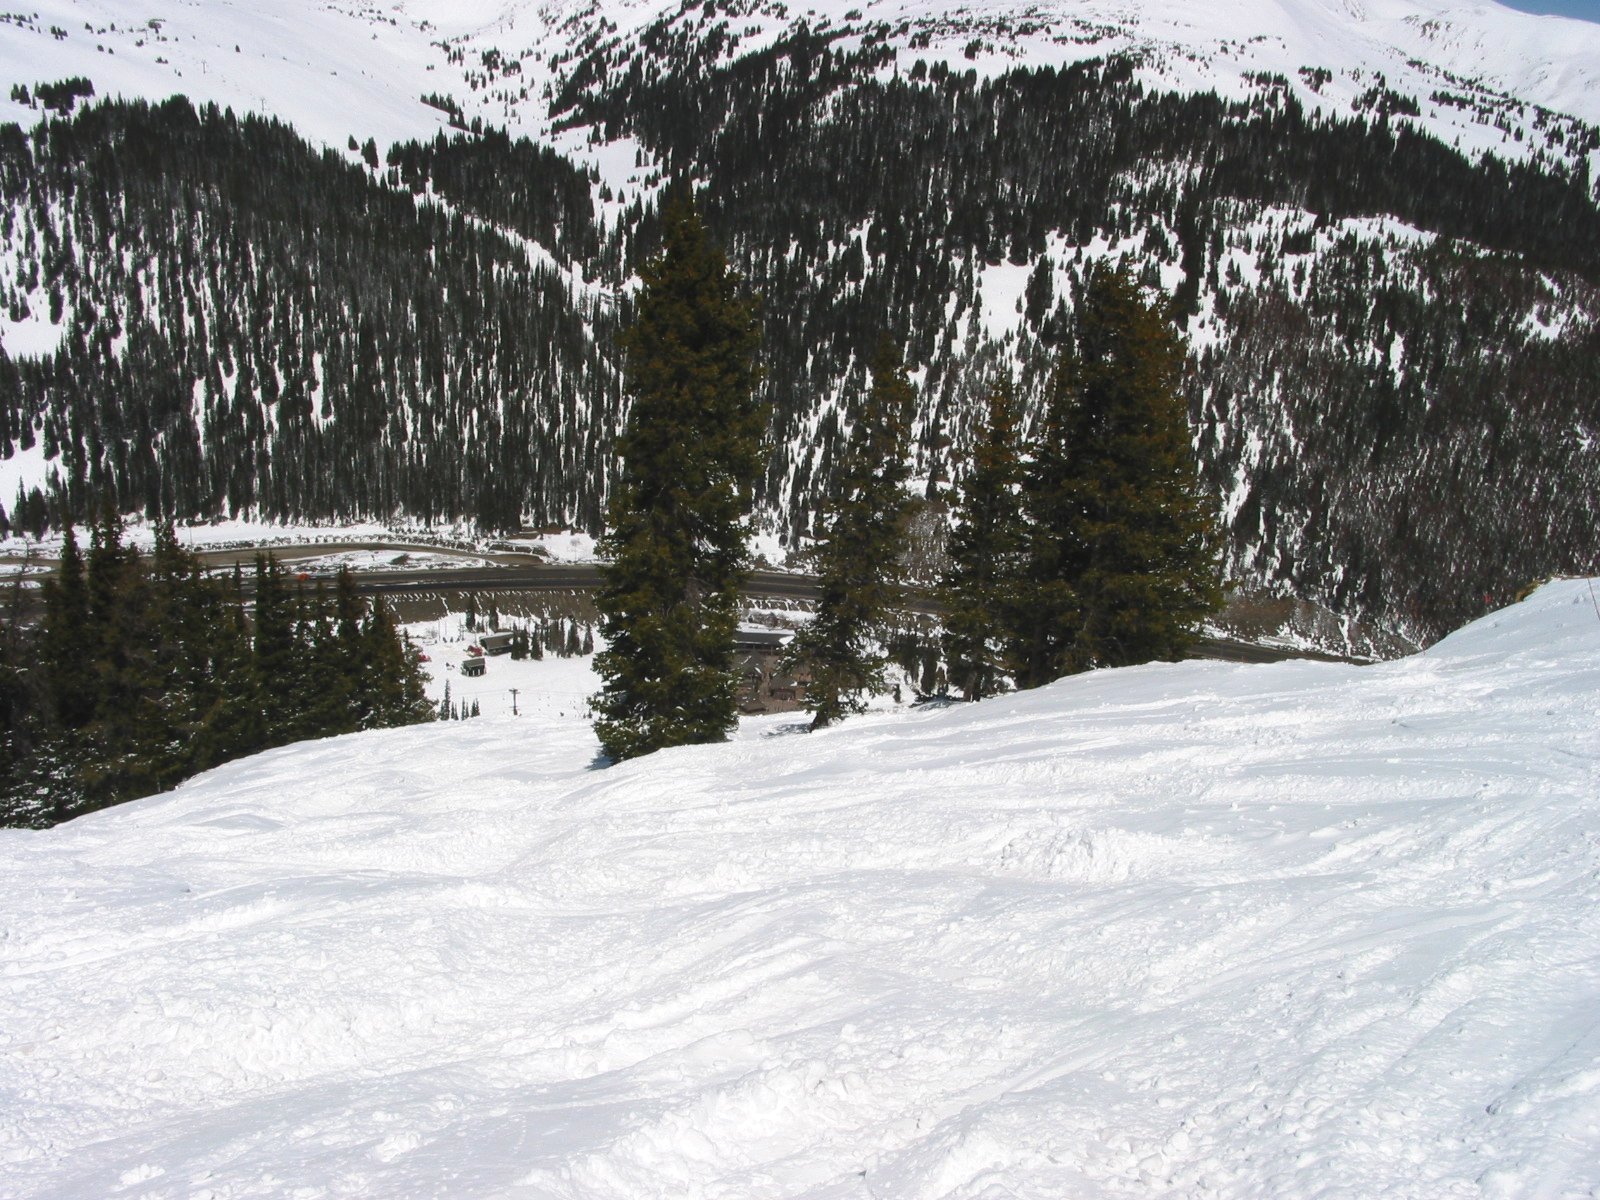 Soft Low Angle Bumps in the top of Avalanche Bowl. They are a good warm-up for the steeper section below.